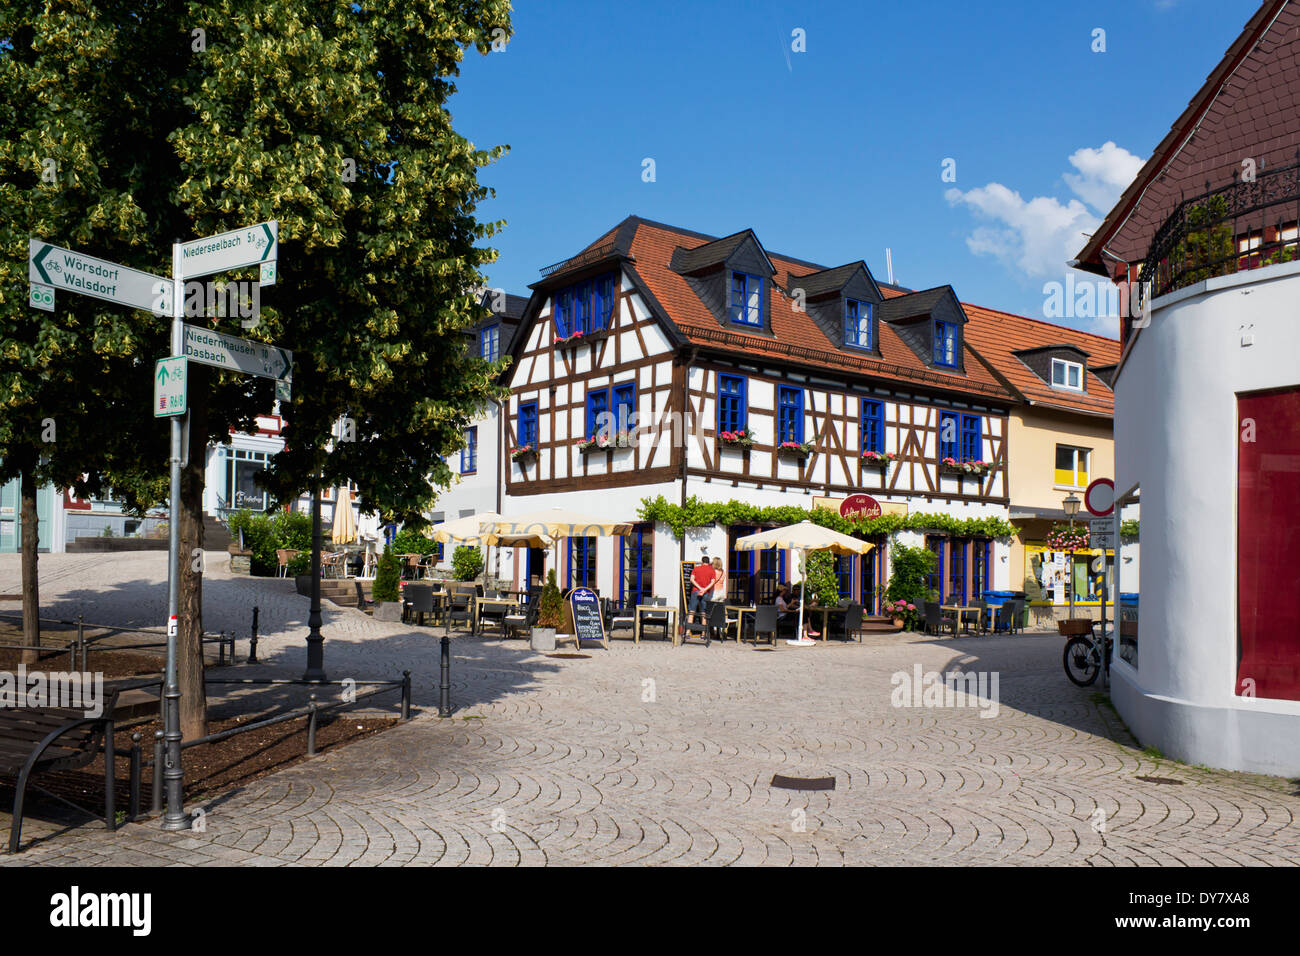 Germany, Hesse, Idstein, Half timbered house Stock Photo